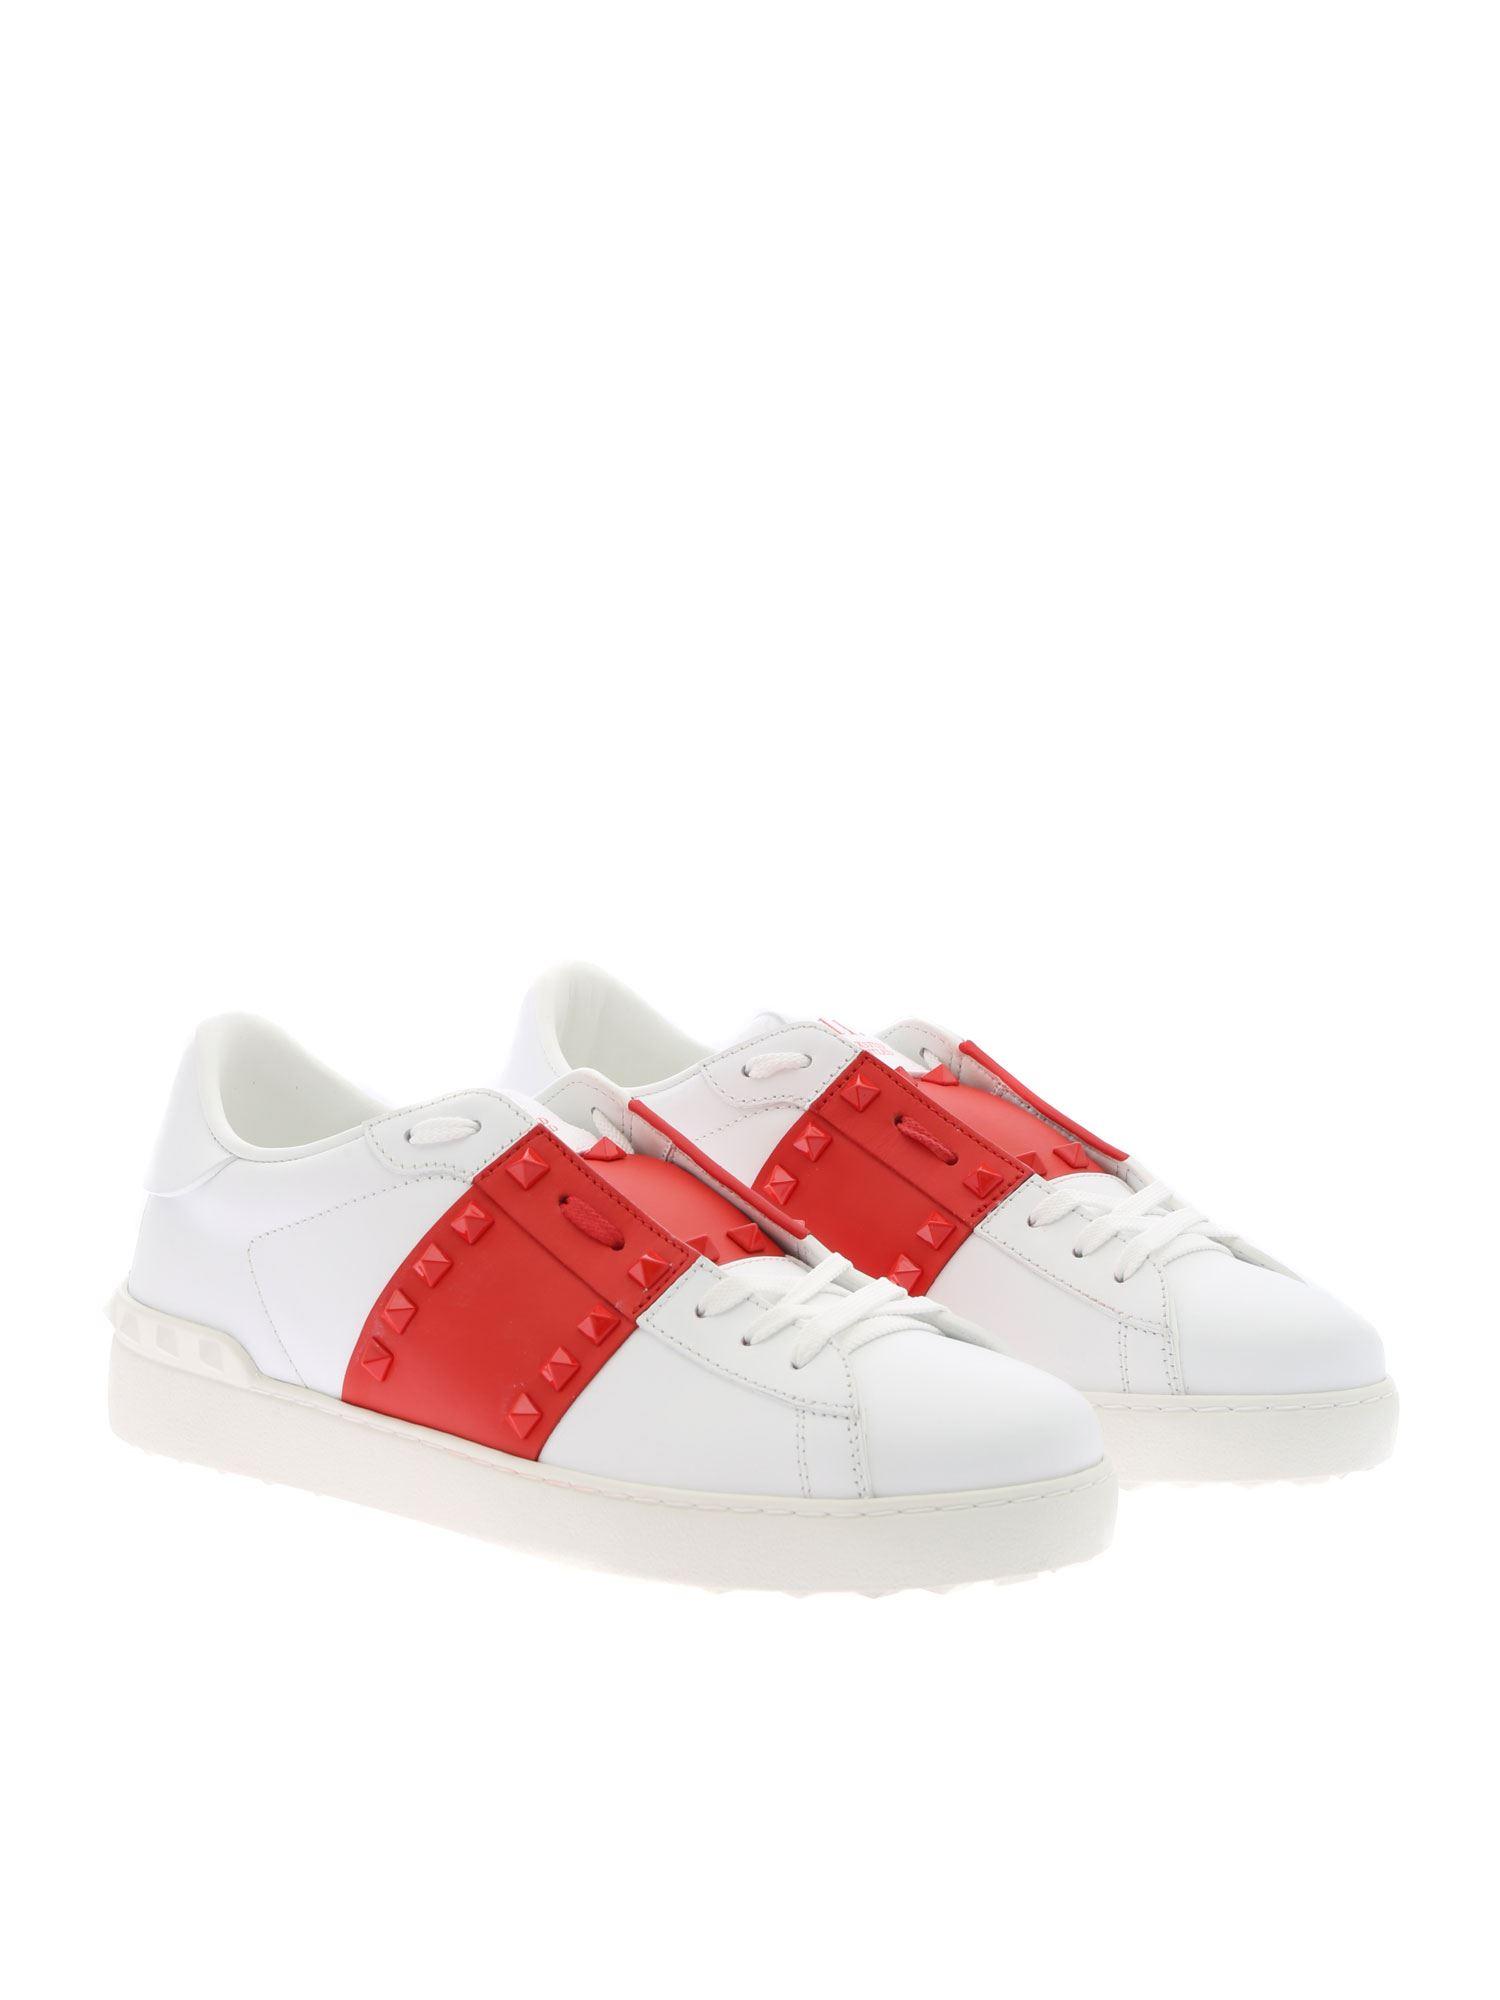 Broom Fru gys Valentino White And Red Sneakers Best Sale, SAVE 45% - motorhomevoyager.co. uk